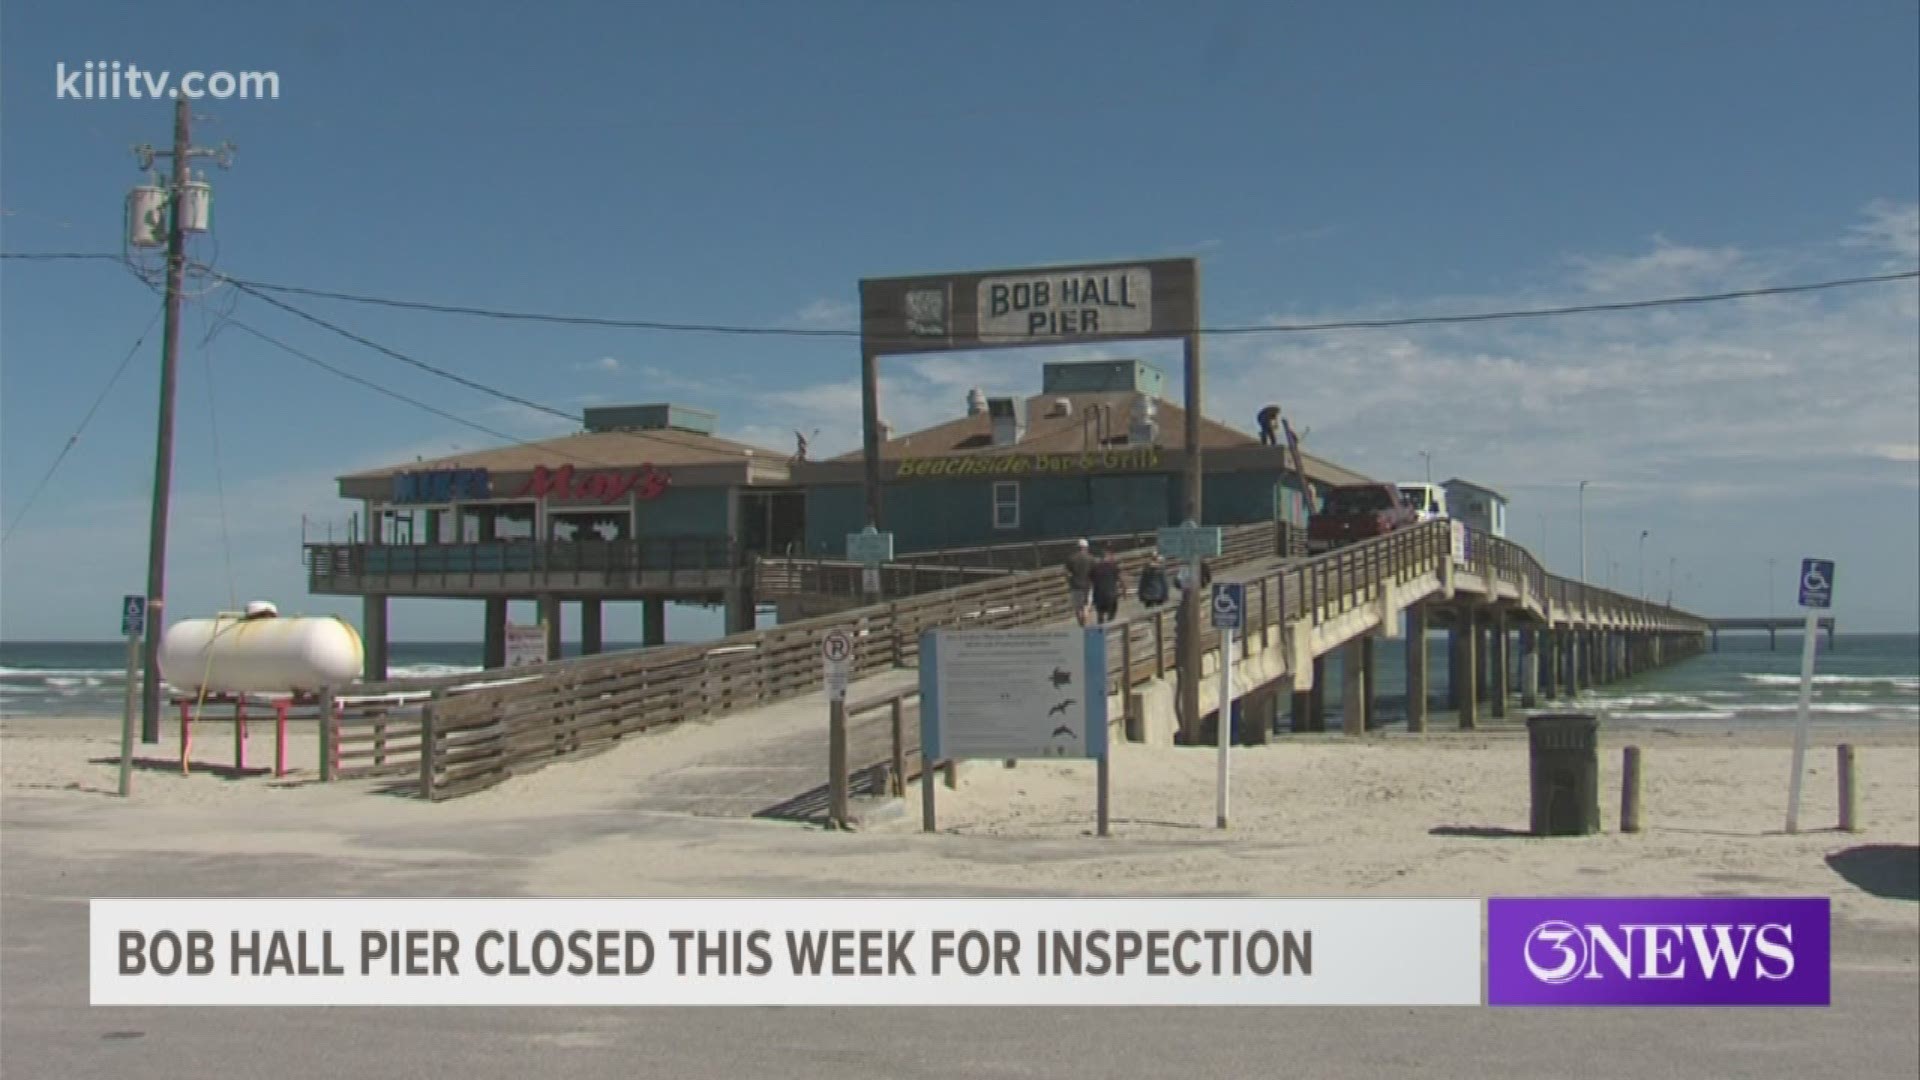 Planned inspections will keep the pier closed to the public for the week